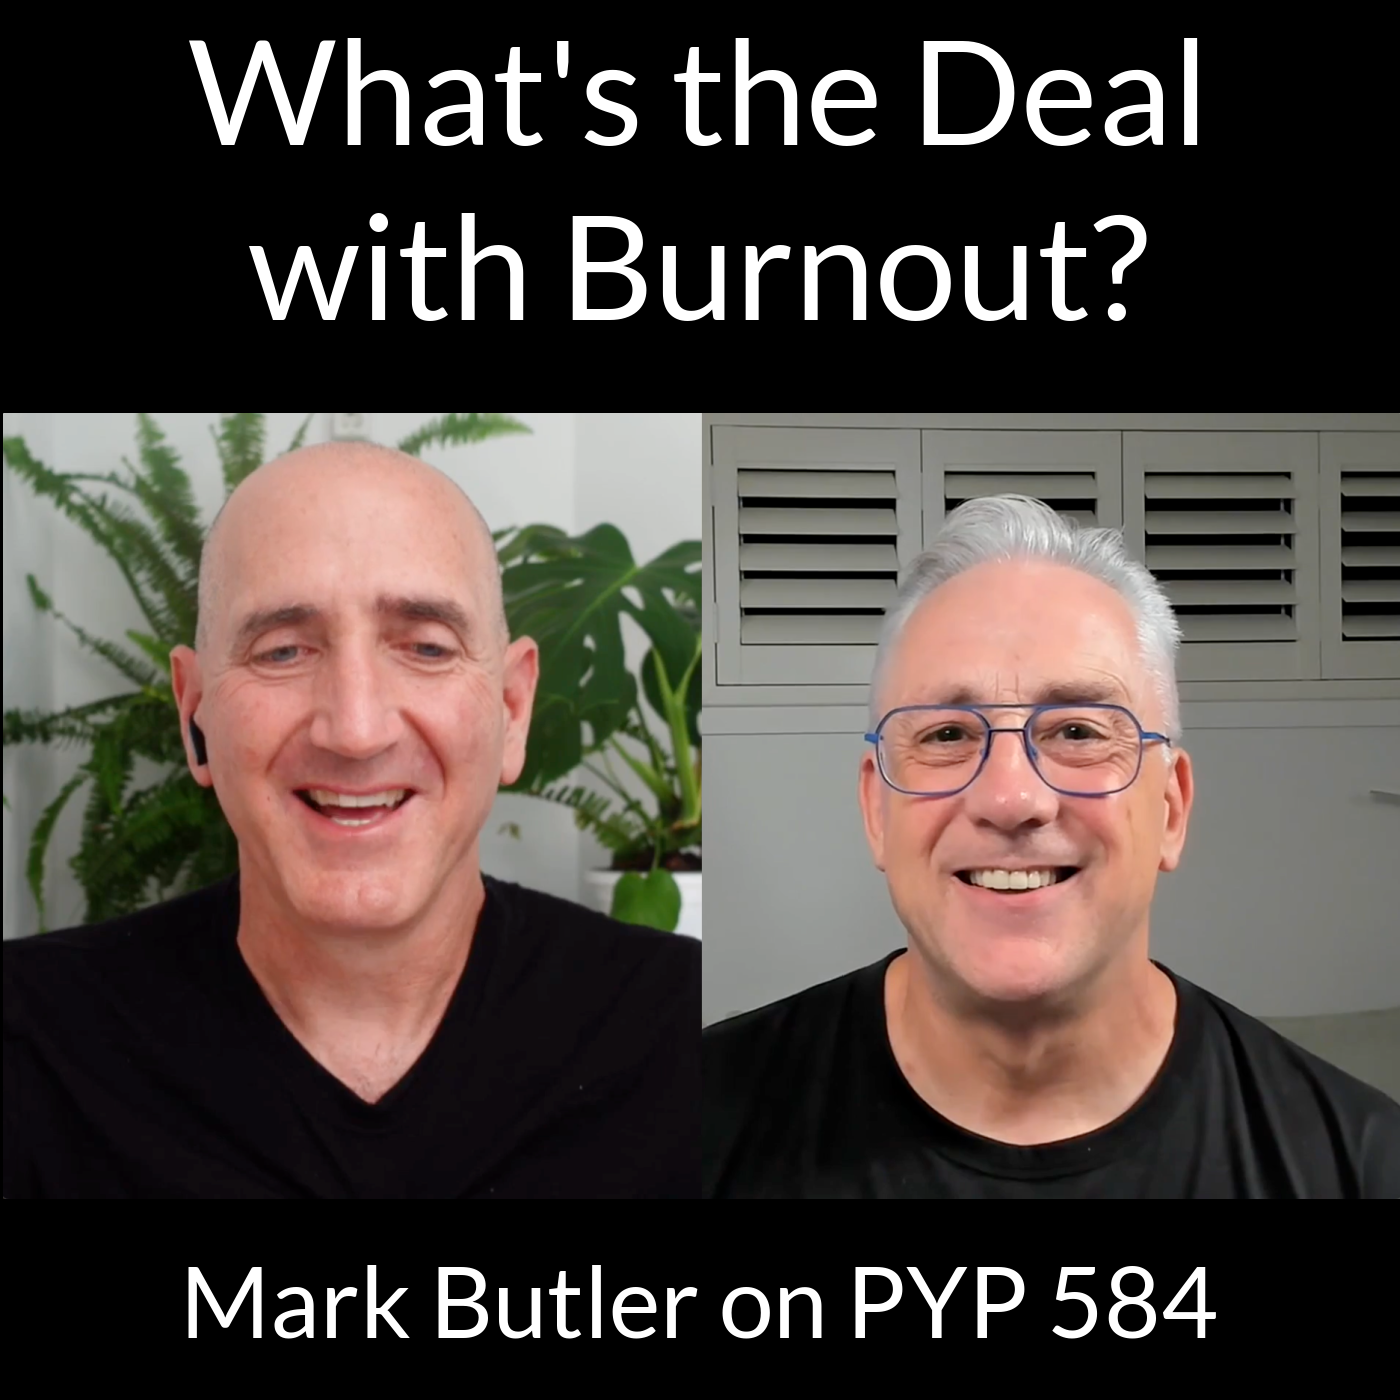 What's the Deal with Burnout? Mark Butler on PYP 584